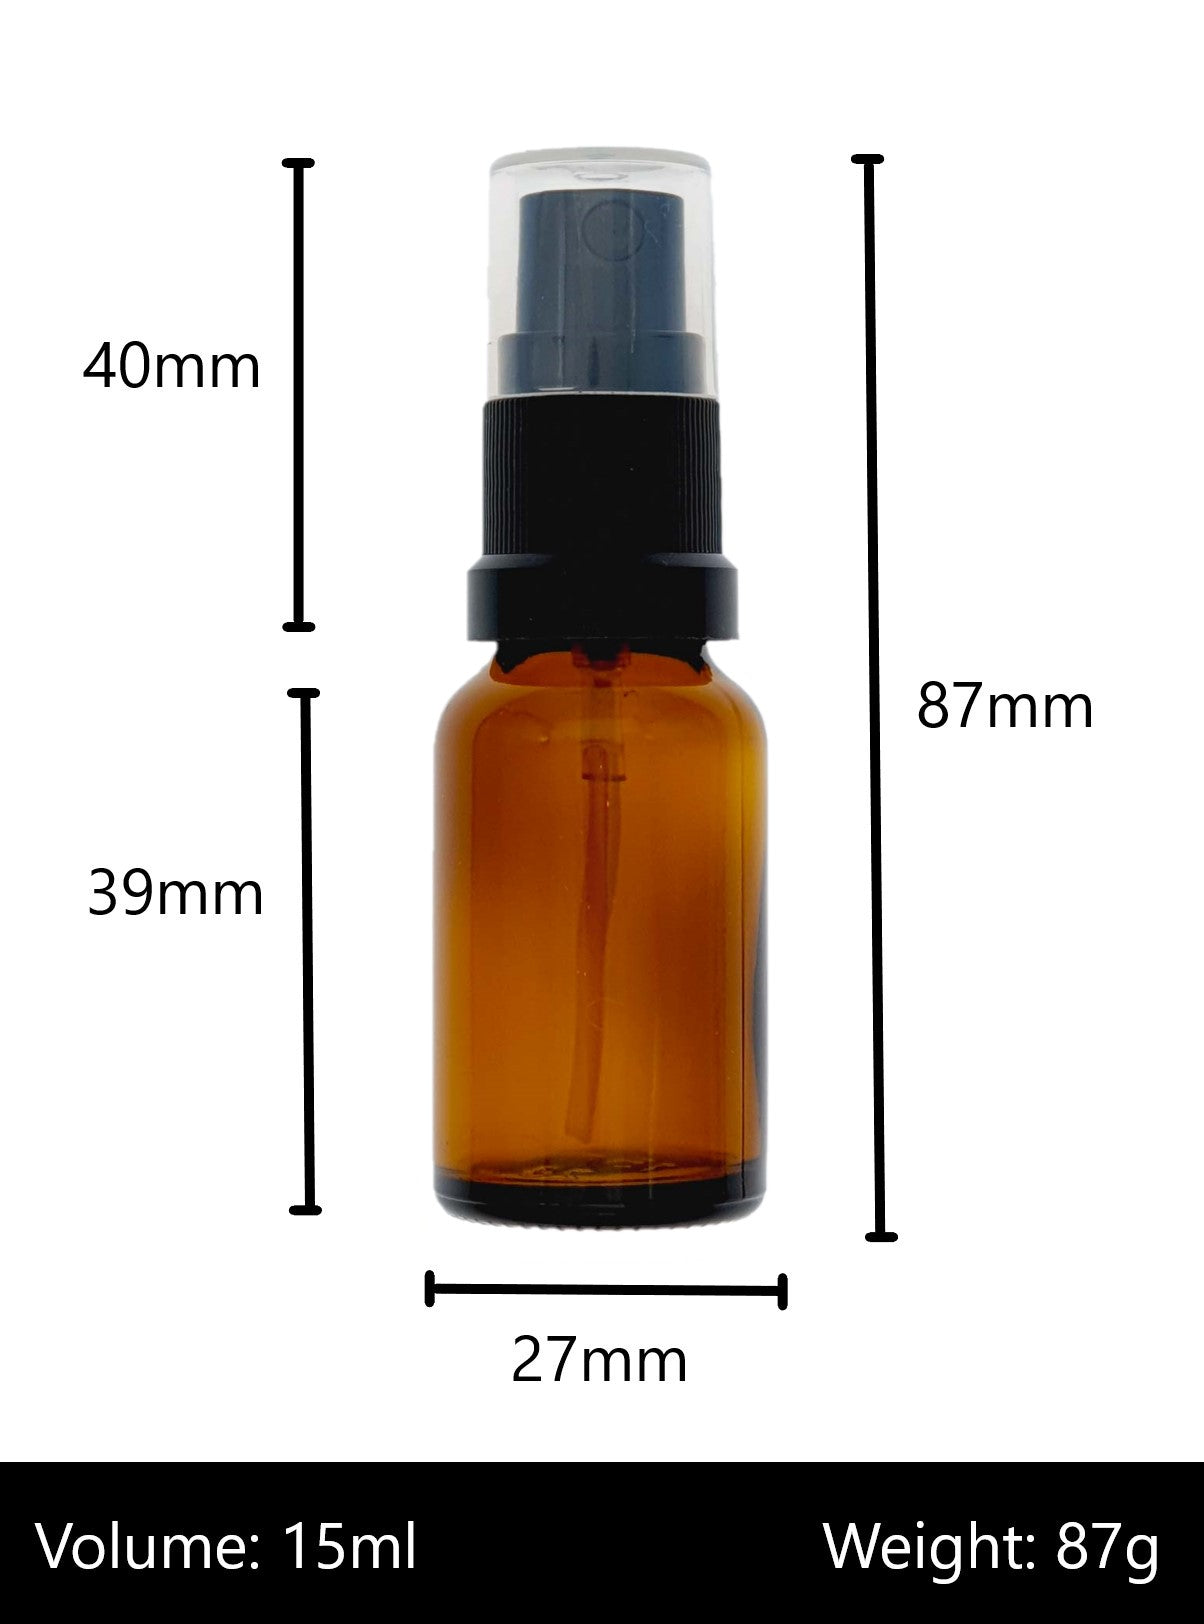 15ml Amber Glass Bottles with Black Atomiser Spray and Clear Overcap